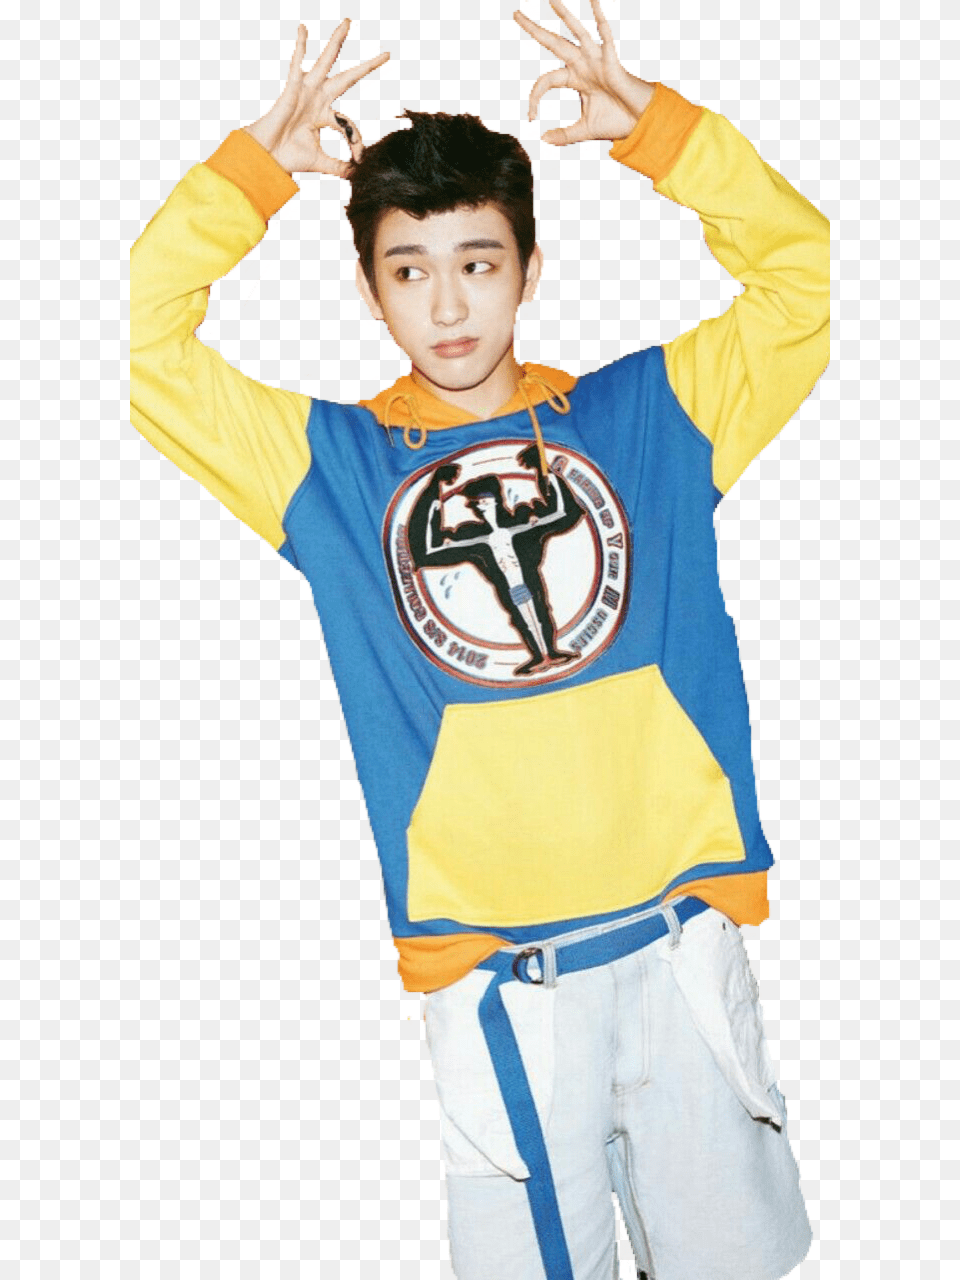 Just Right Jinyoung Got7 Jinyoung Just Right, T-shirt, Sleeve, Shirt, Portrait Png Image